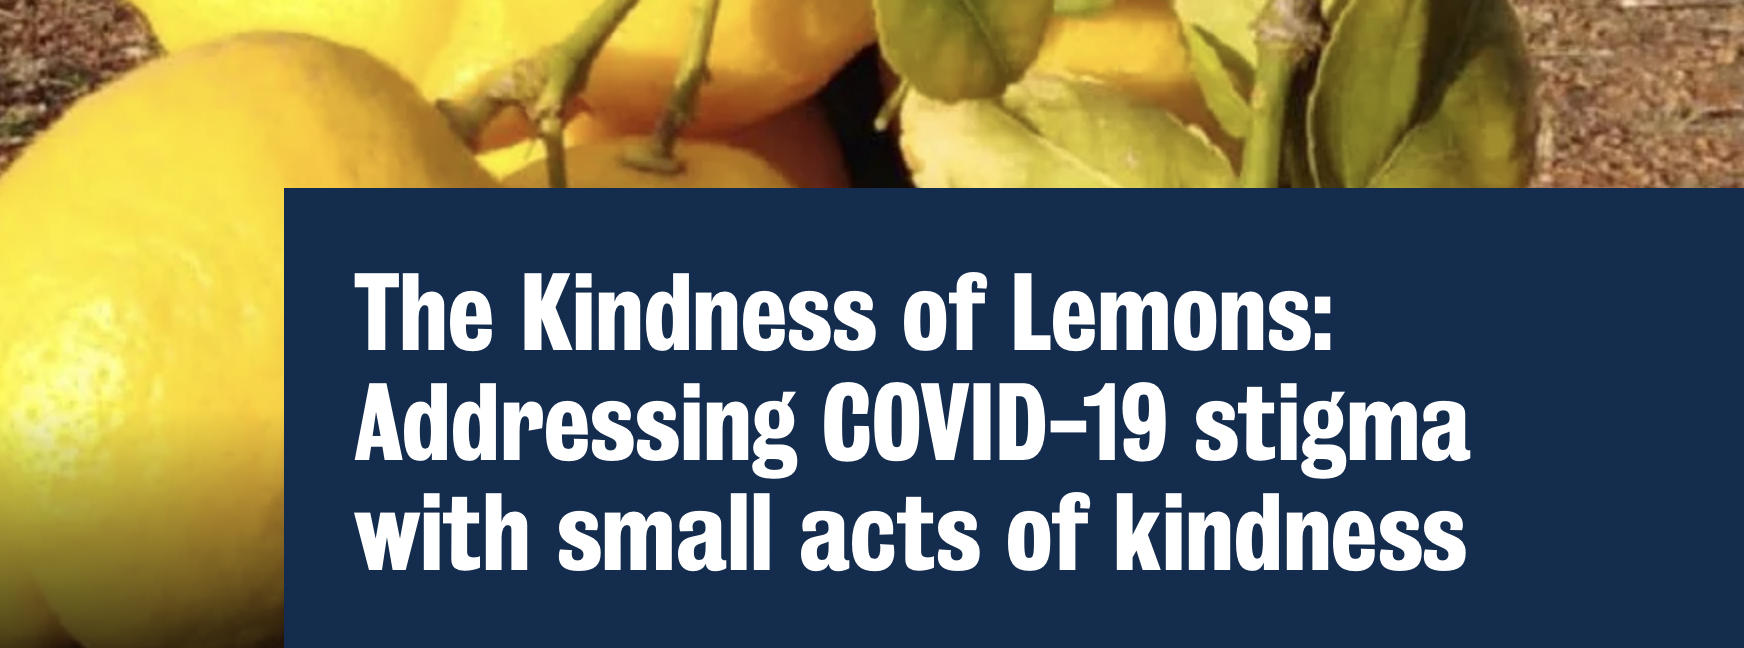 The Kindness of Lemons: Addressing COVID-19 stigma with small acts of kindness